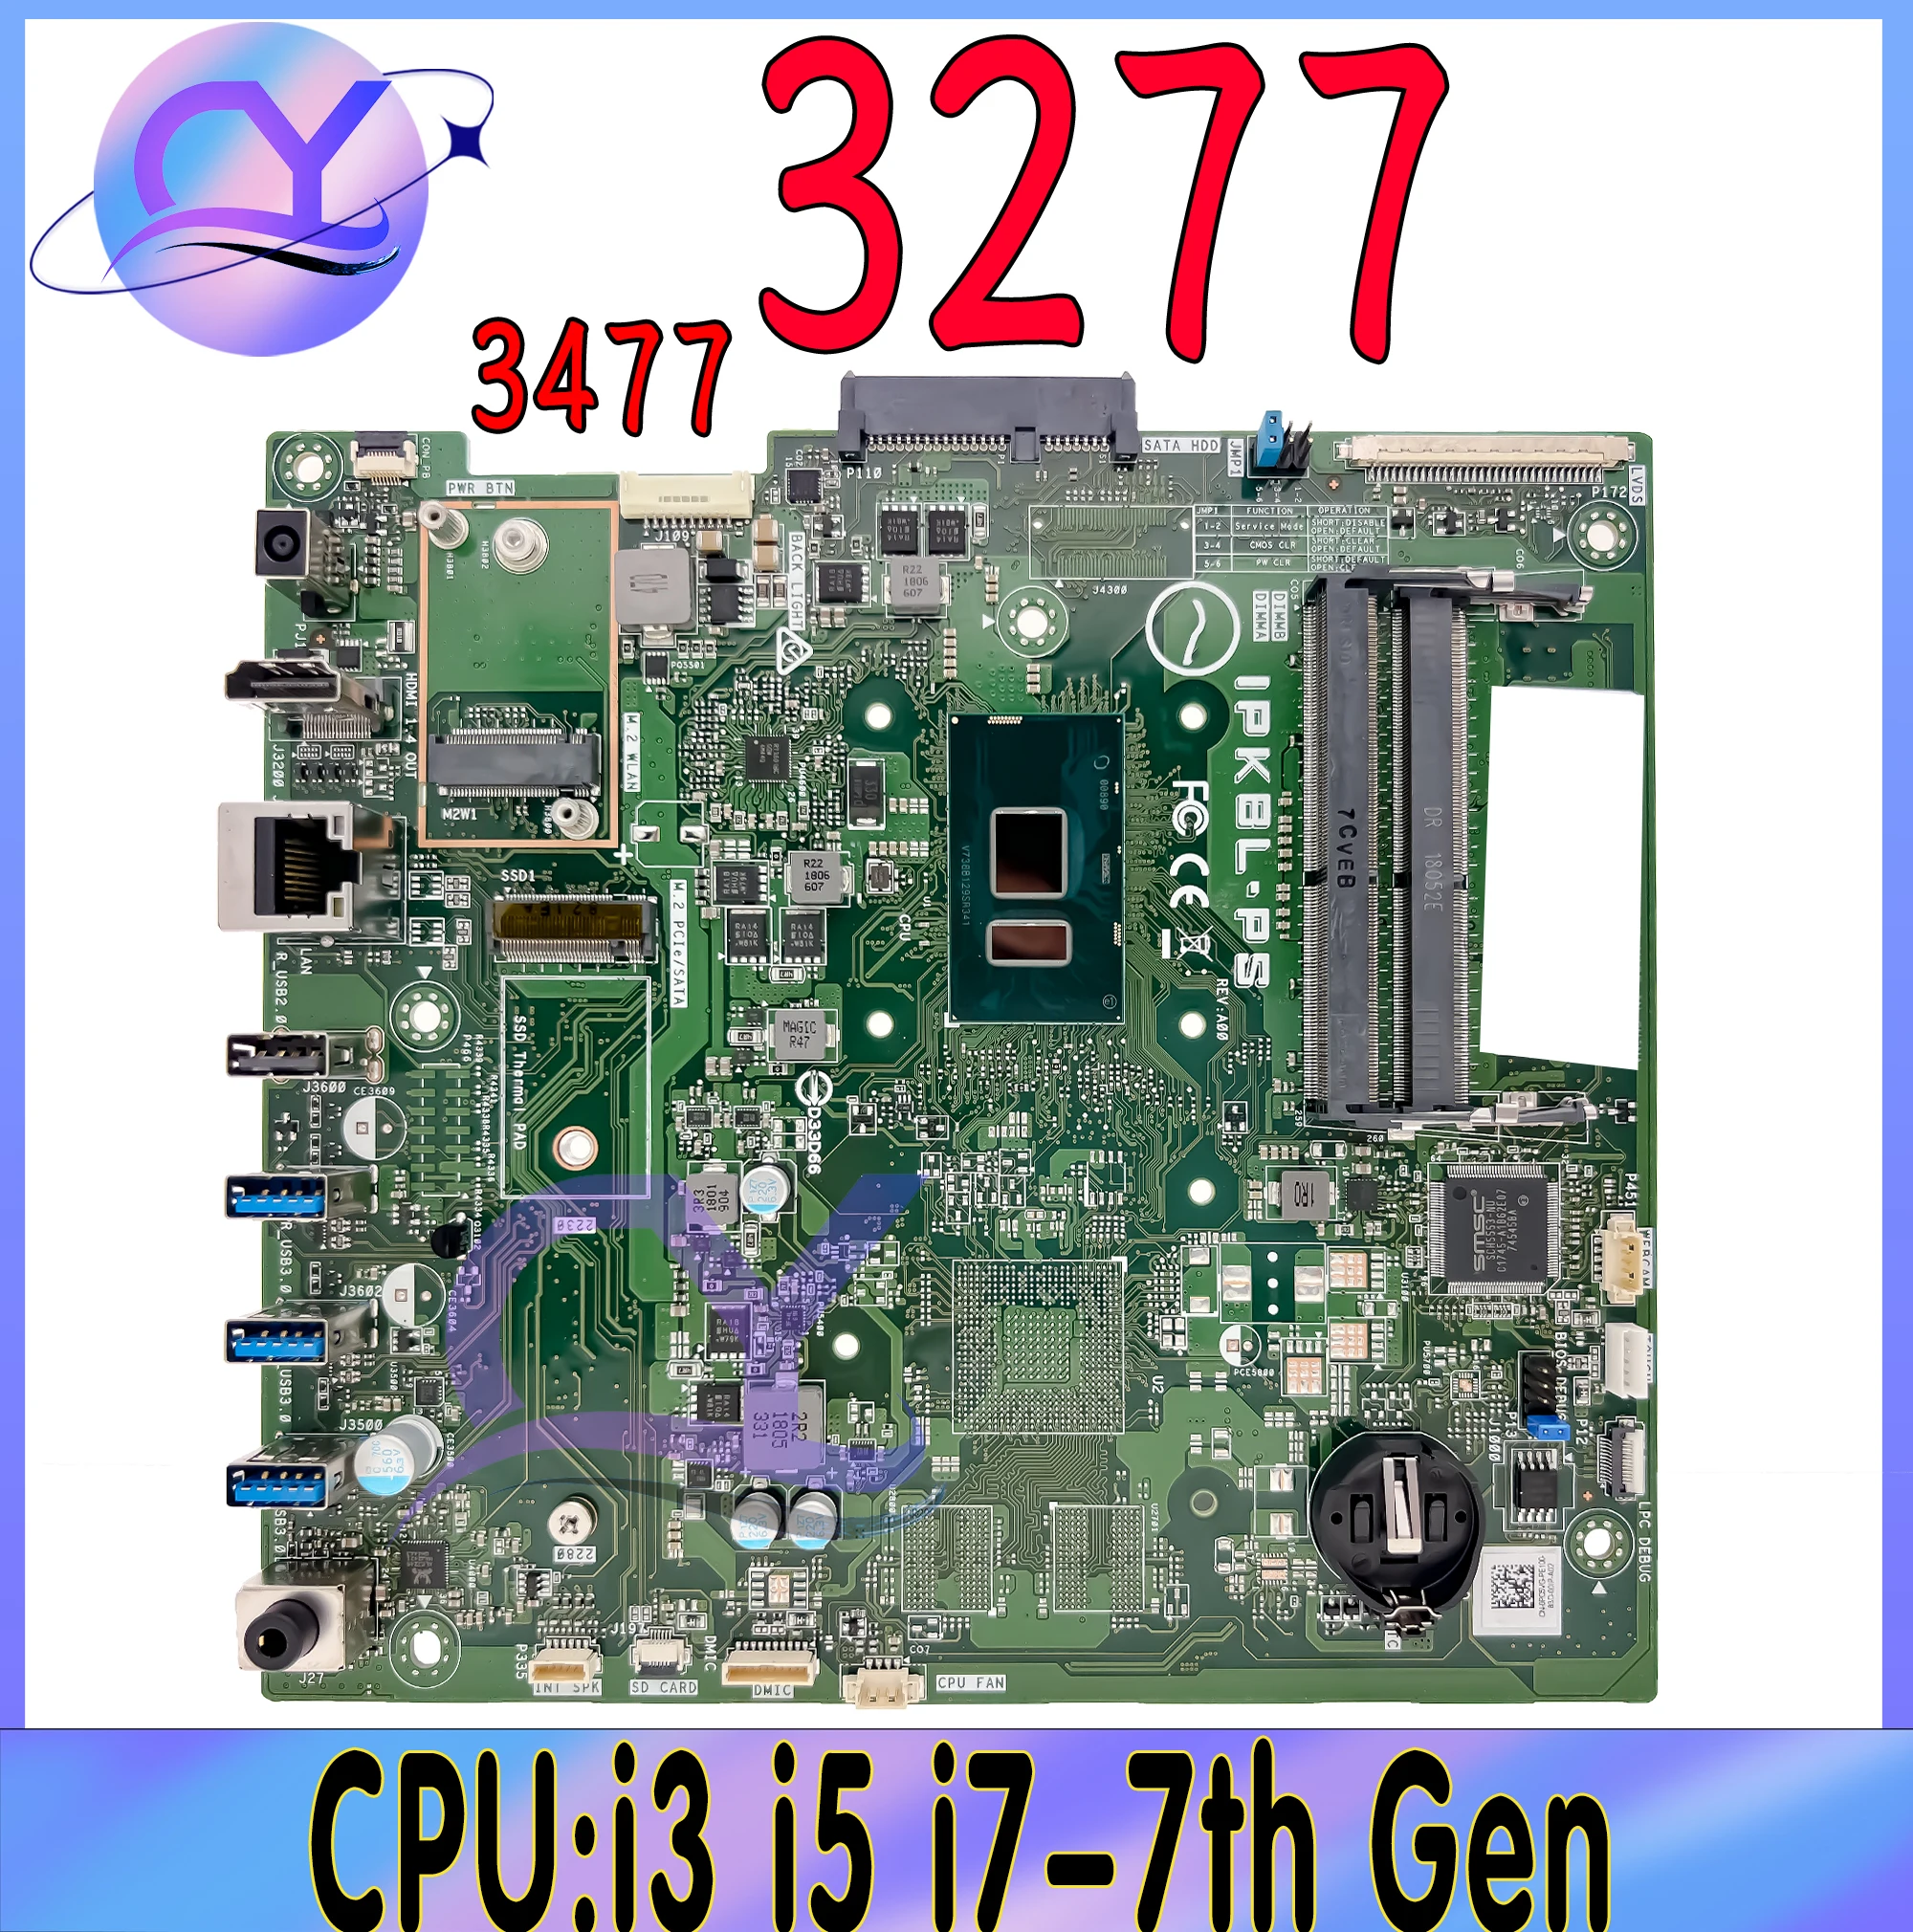 

IPKBL-PS Mainboard For Dell Inspiron 3277 3477 Laptop Motherboard With i3 i5 i7-7th Gen UMA DDR4 100% Test Ok